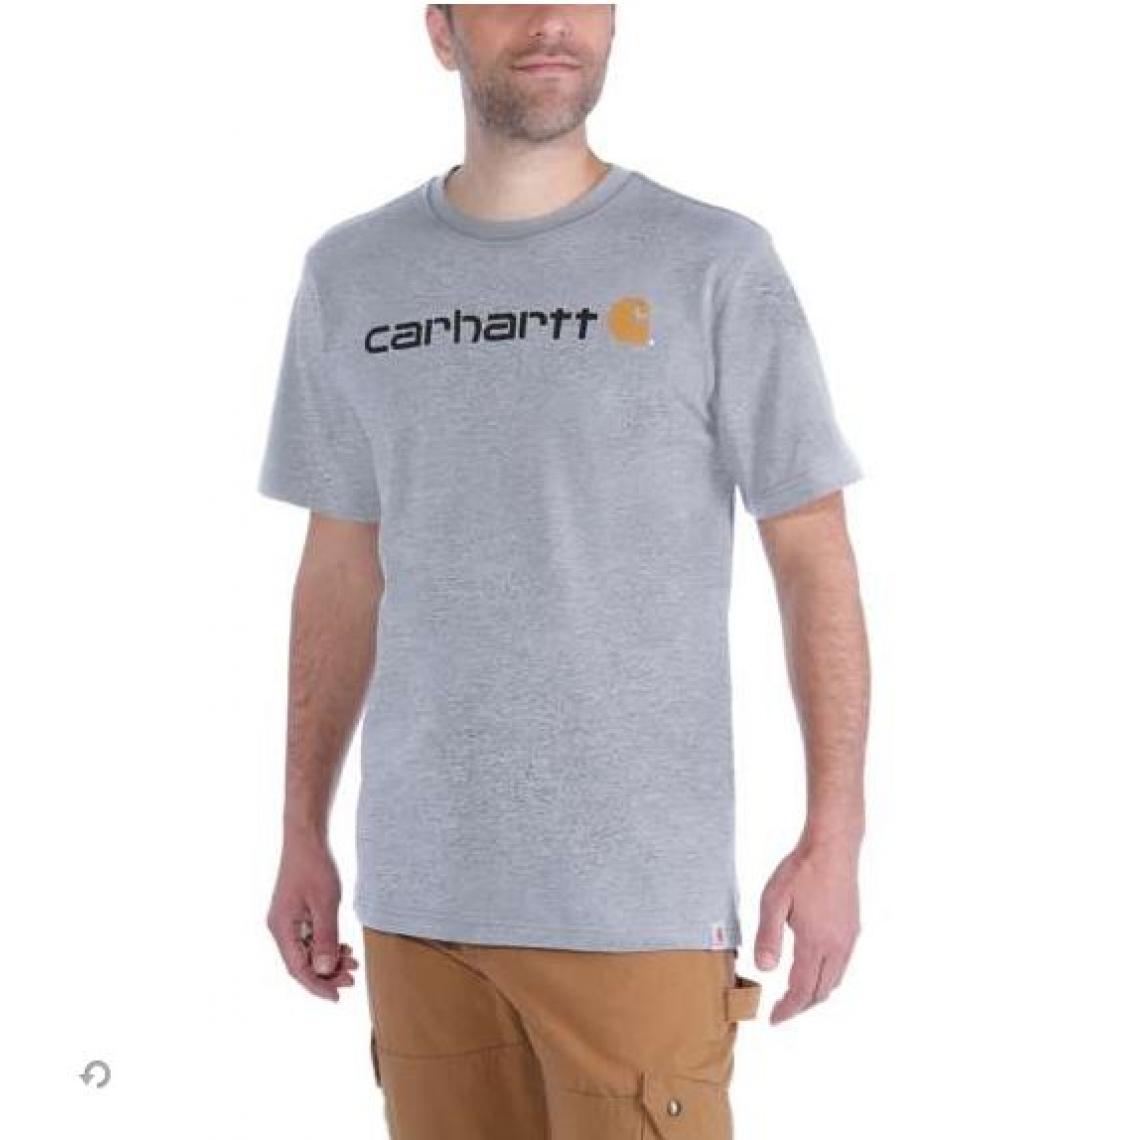 Carhartt - T-Shirt MC Core Logo 103361CARHARTT 034 Heather grey - Taille M - S1103361034M - Protections corps